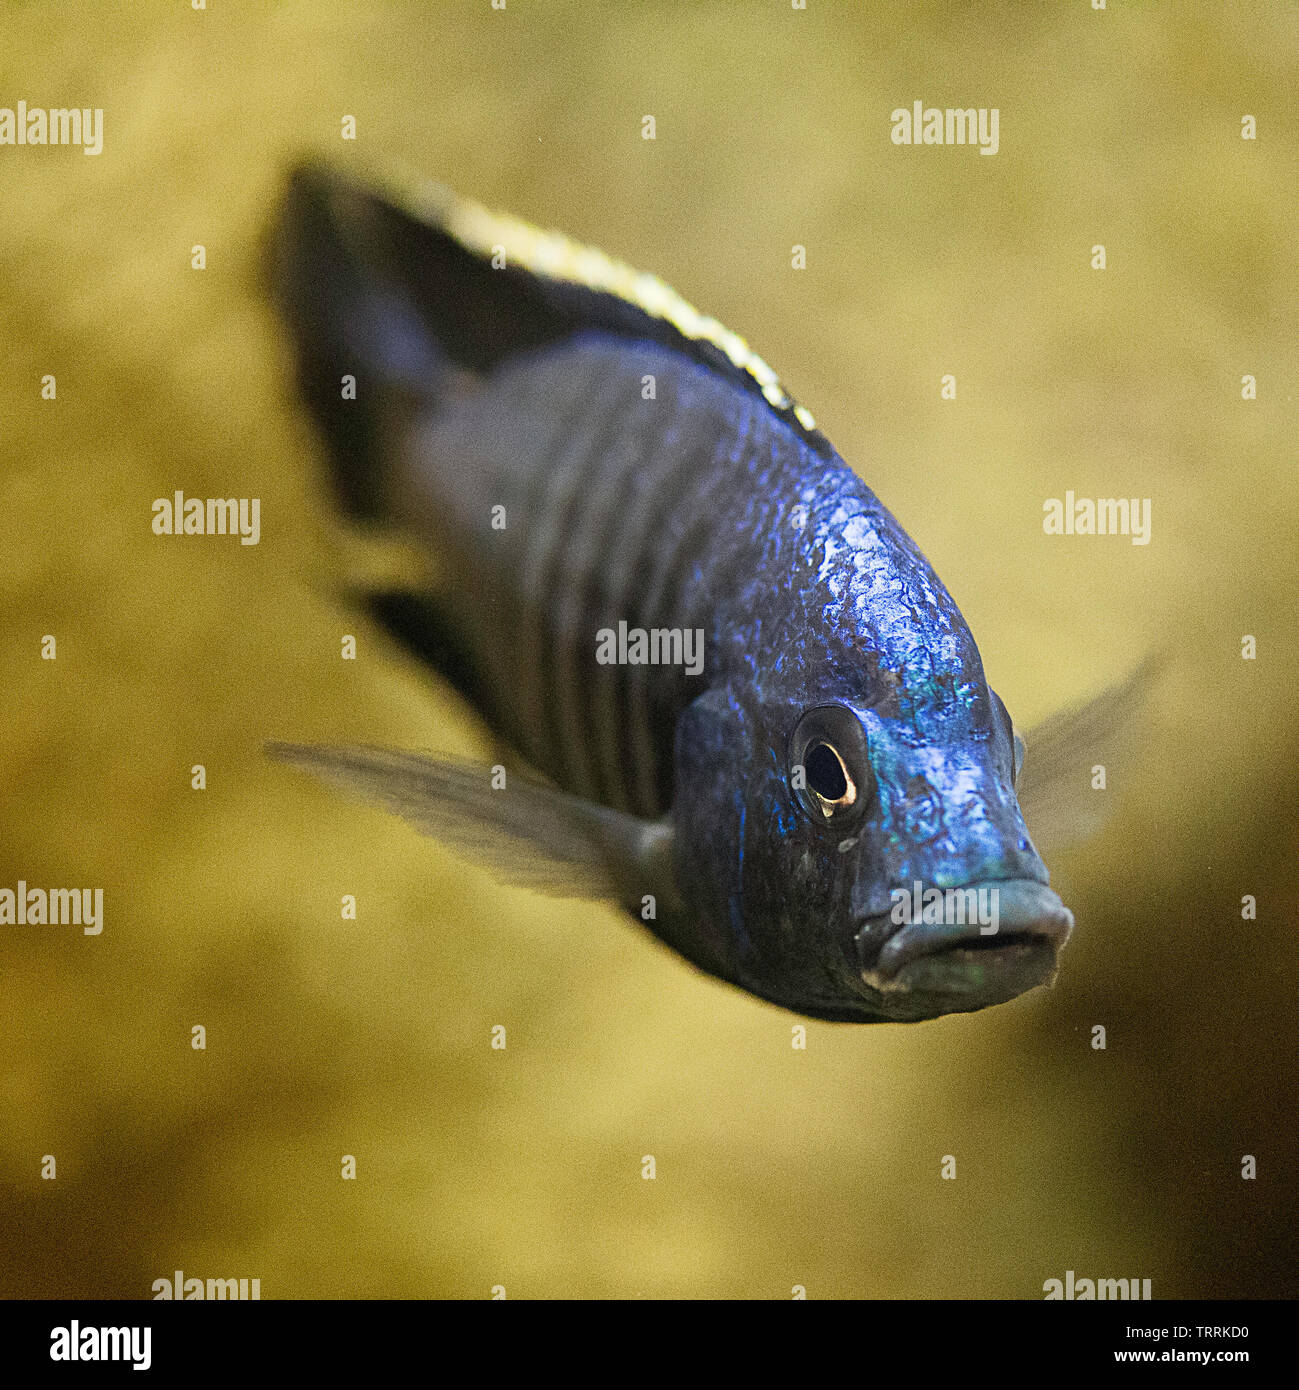 Macro image of a Blue Cichlid (Cichlidae) hovering in an aquarium. Stock Photo